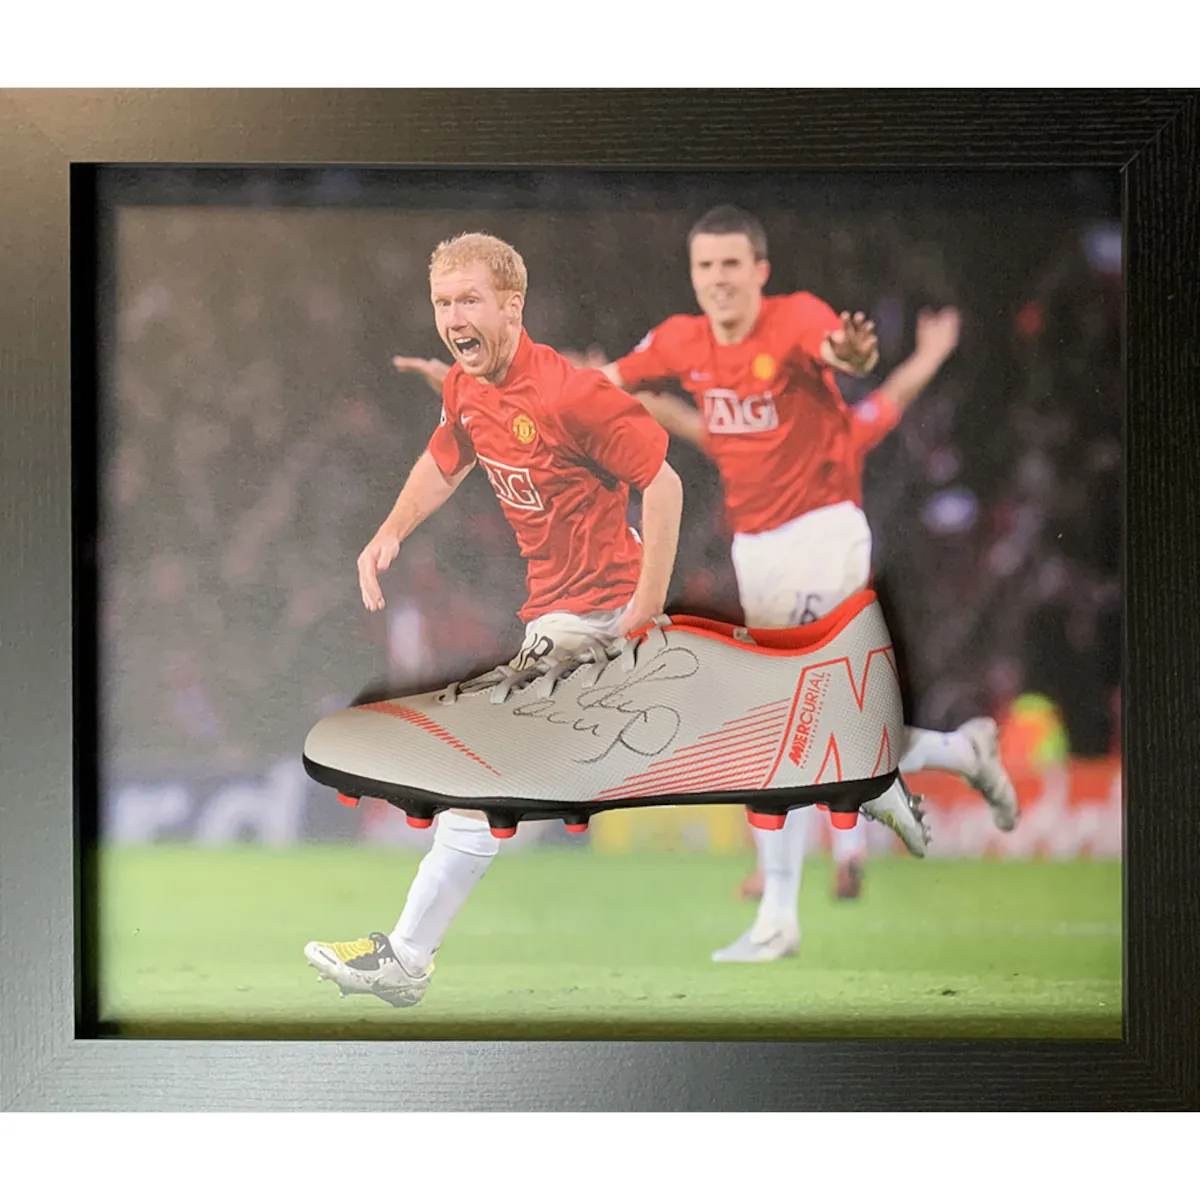 188311 Manchester United F.C. Paul Scholes Framed Signed Football Boot